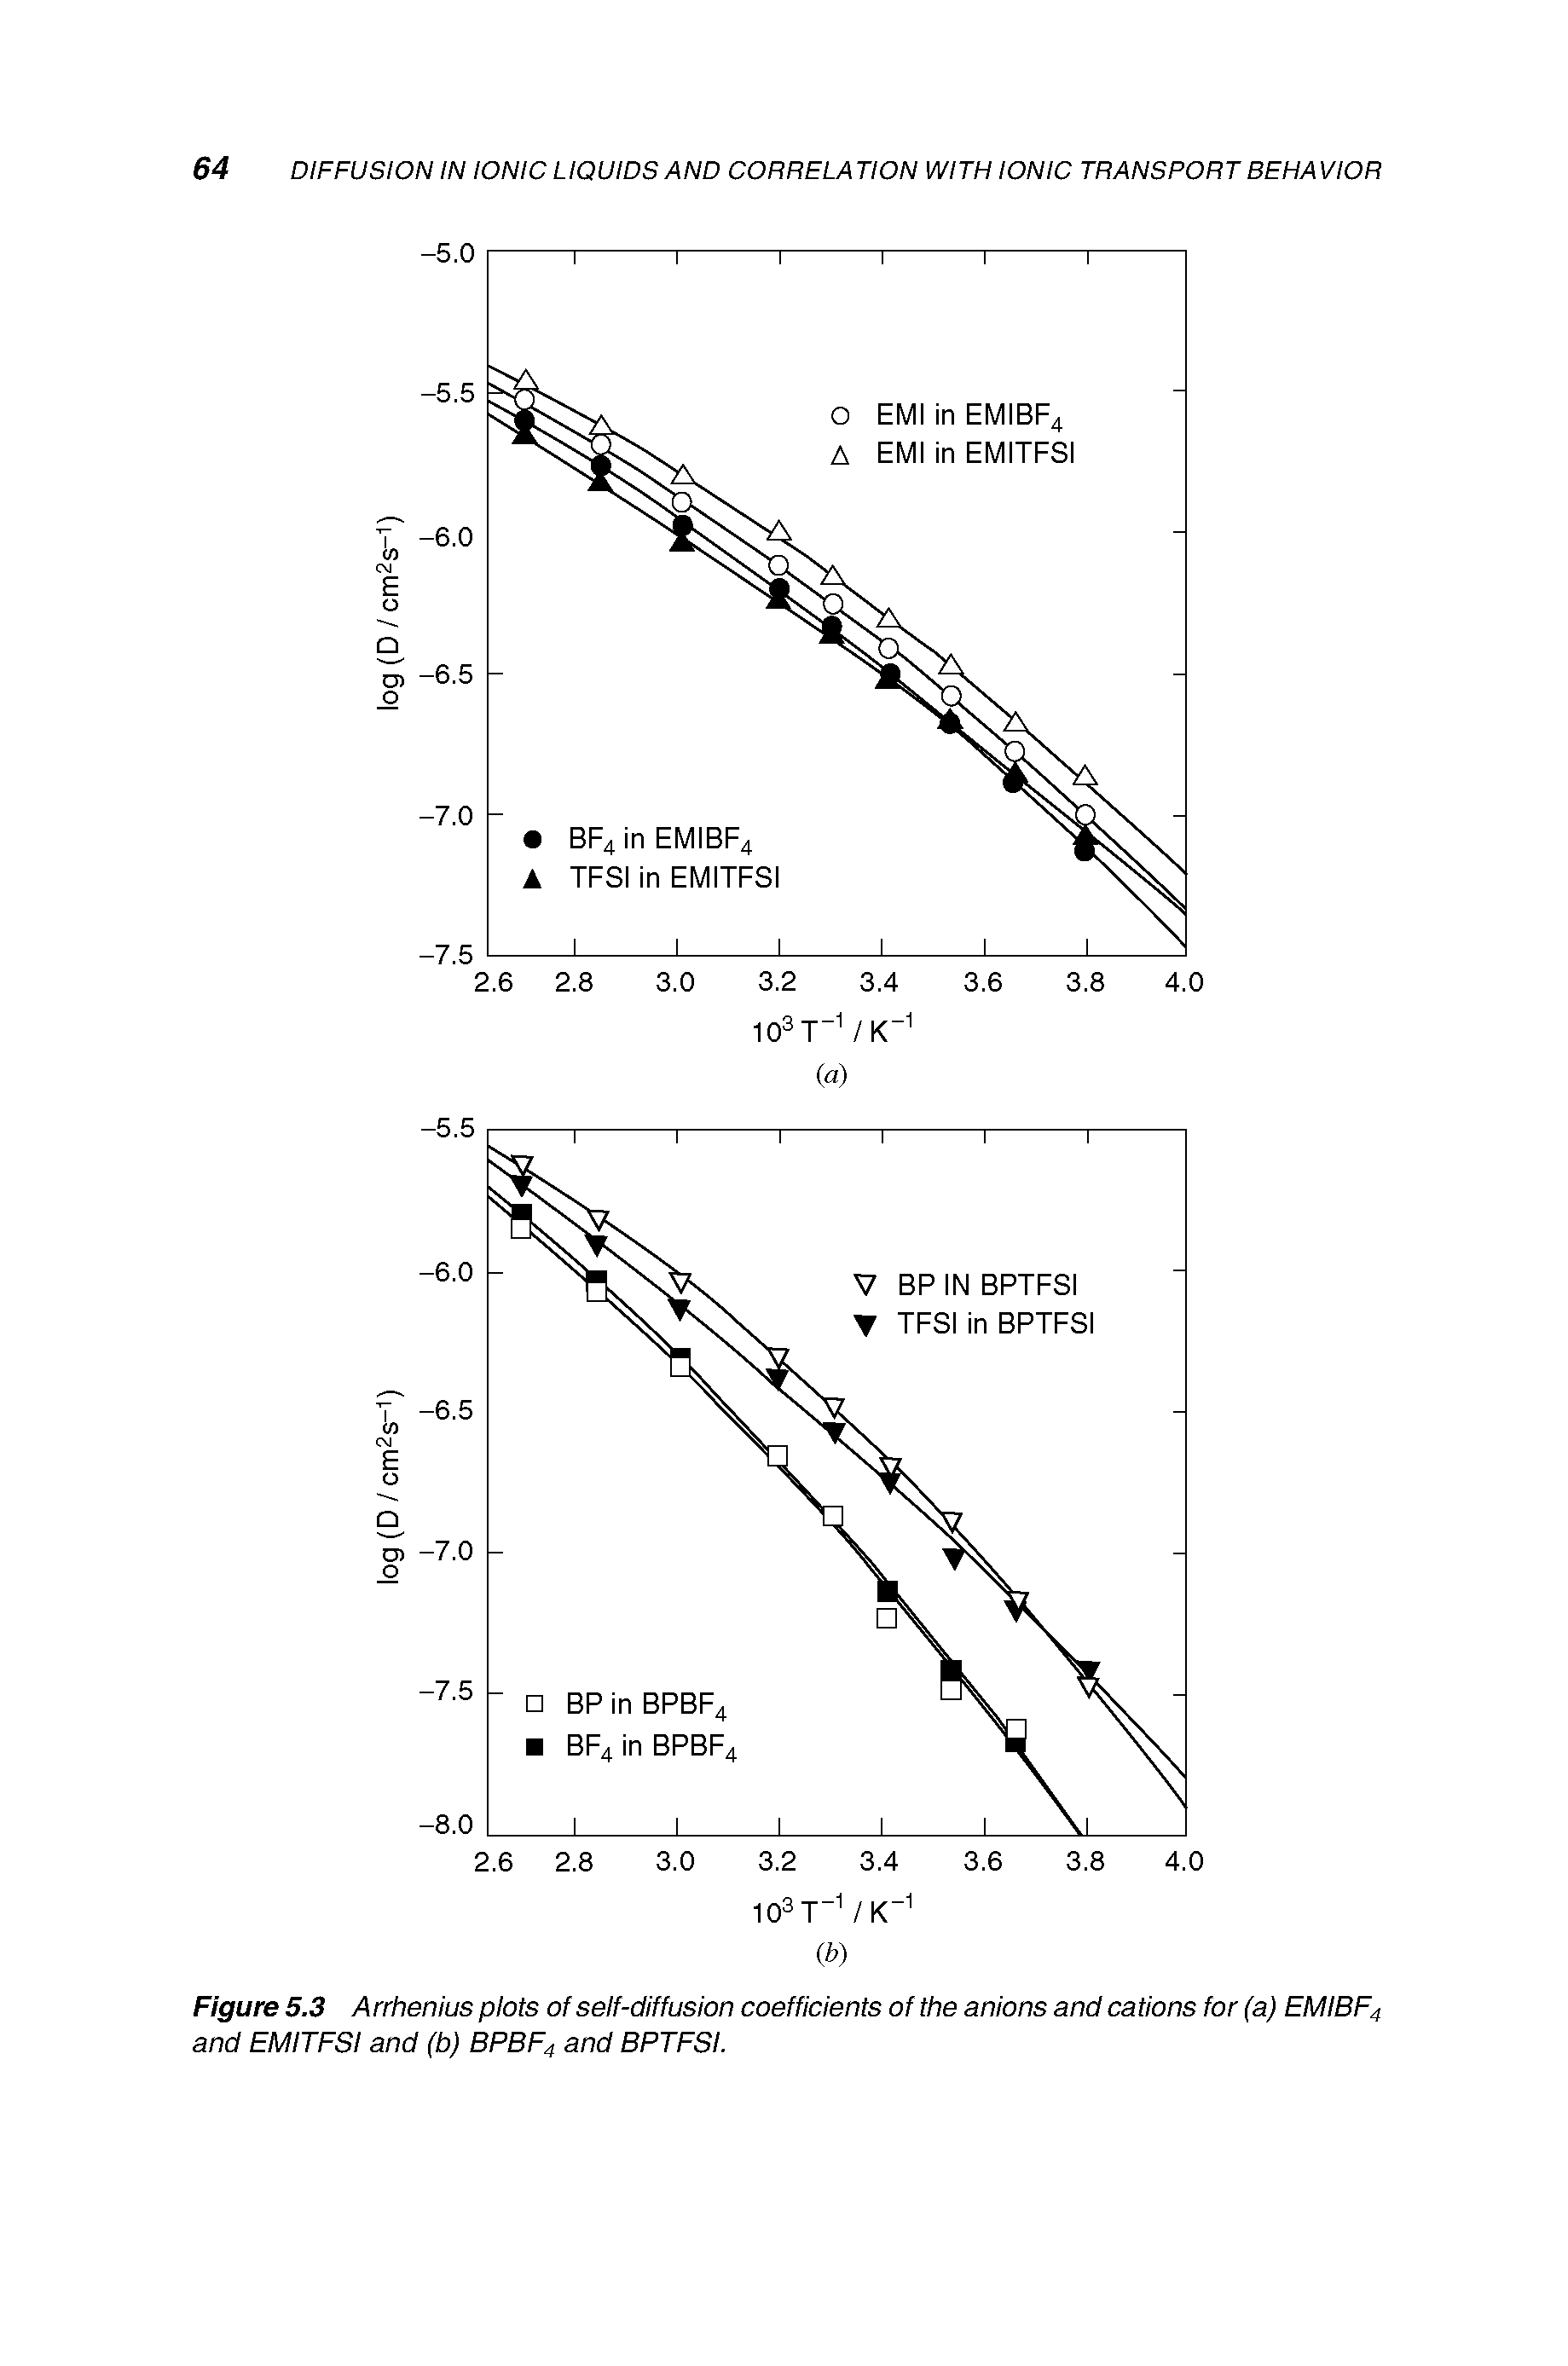 Figure 5.3 Arrhenius plots of self-diffusion coefficients of the anions and cations for (a) EMIBF4 and EMITFSI and (b) BPBF4 and BPTFSi.